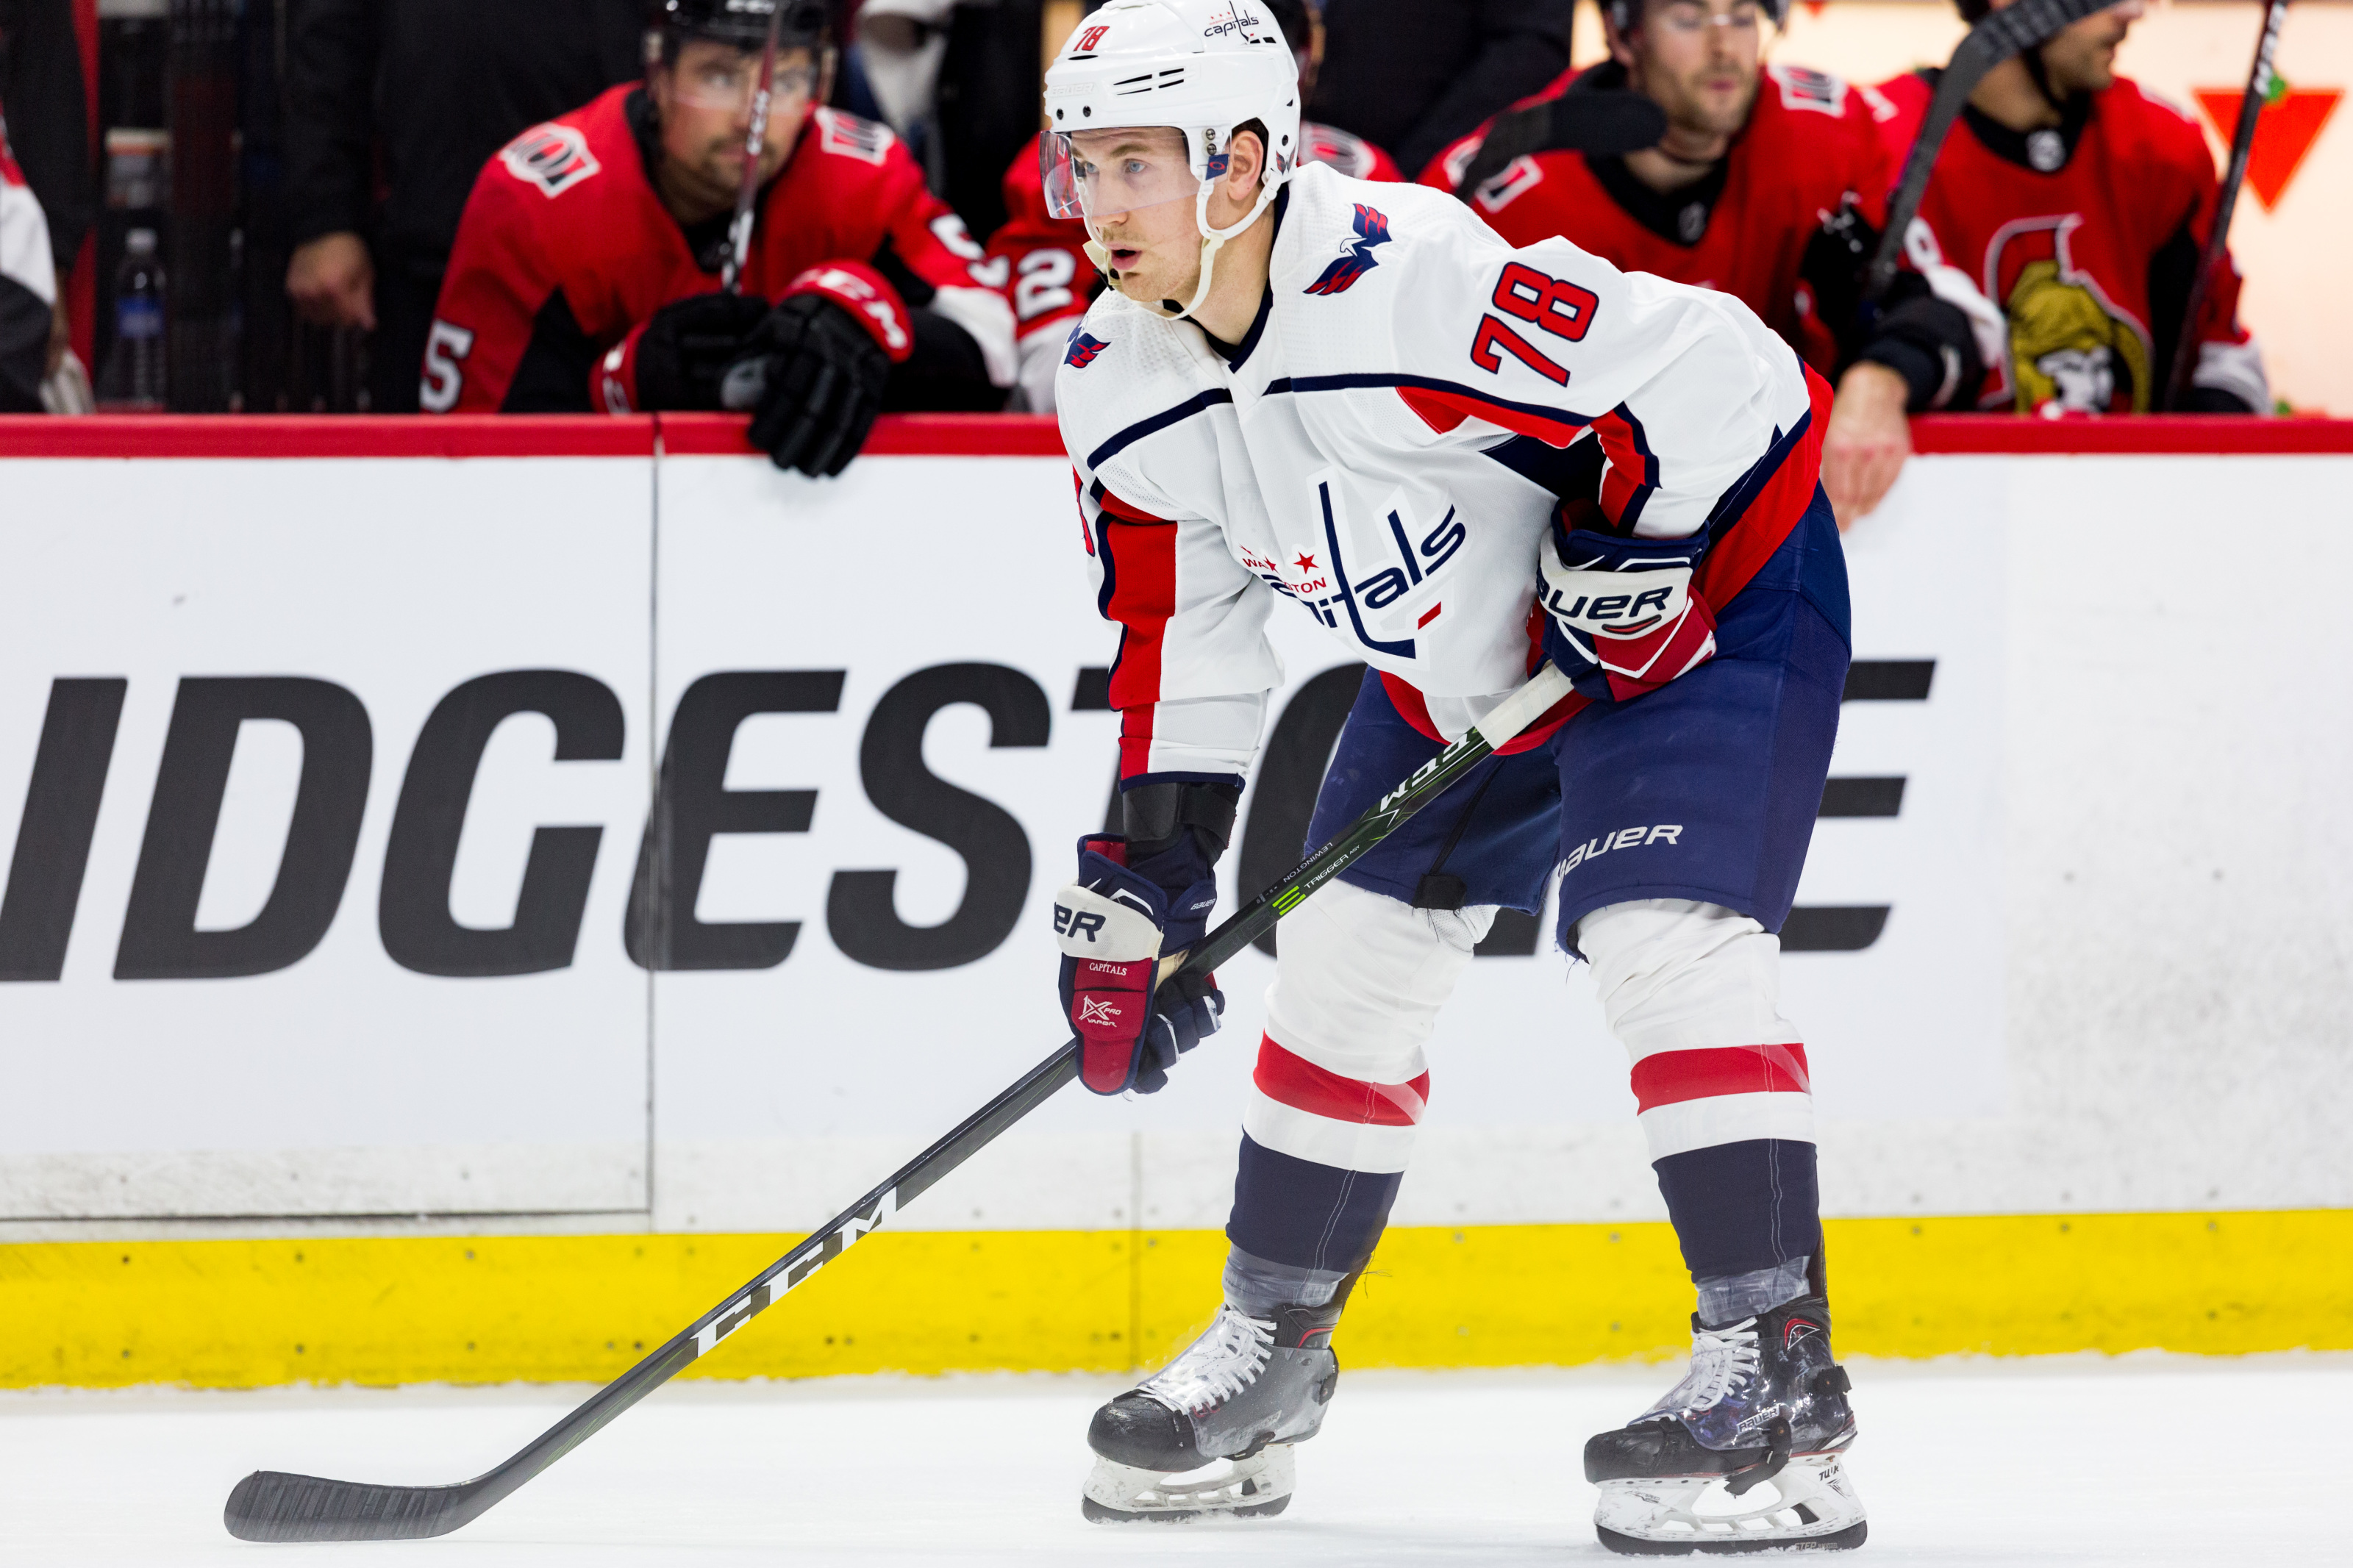 Capitals' Evgeny Kuznetsov suspended 1 game for high-sticking - NBC Sports